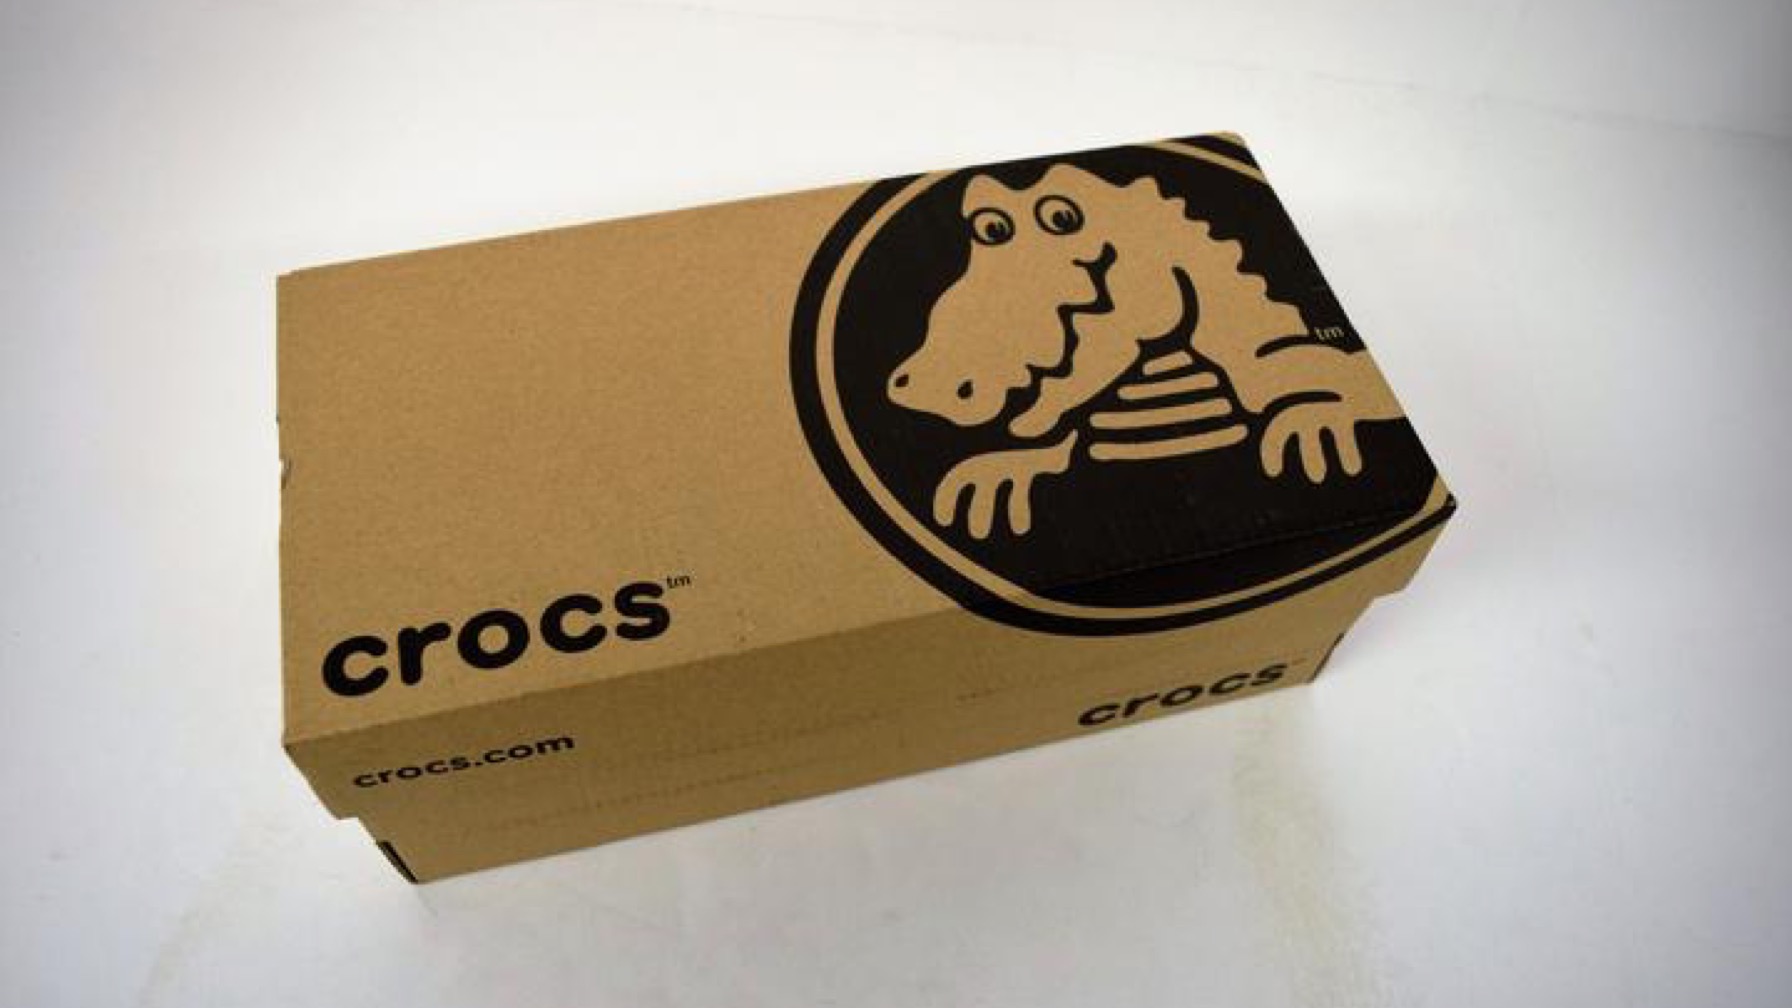 Crocs Just Released High-Heels And People Are Losing It